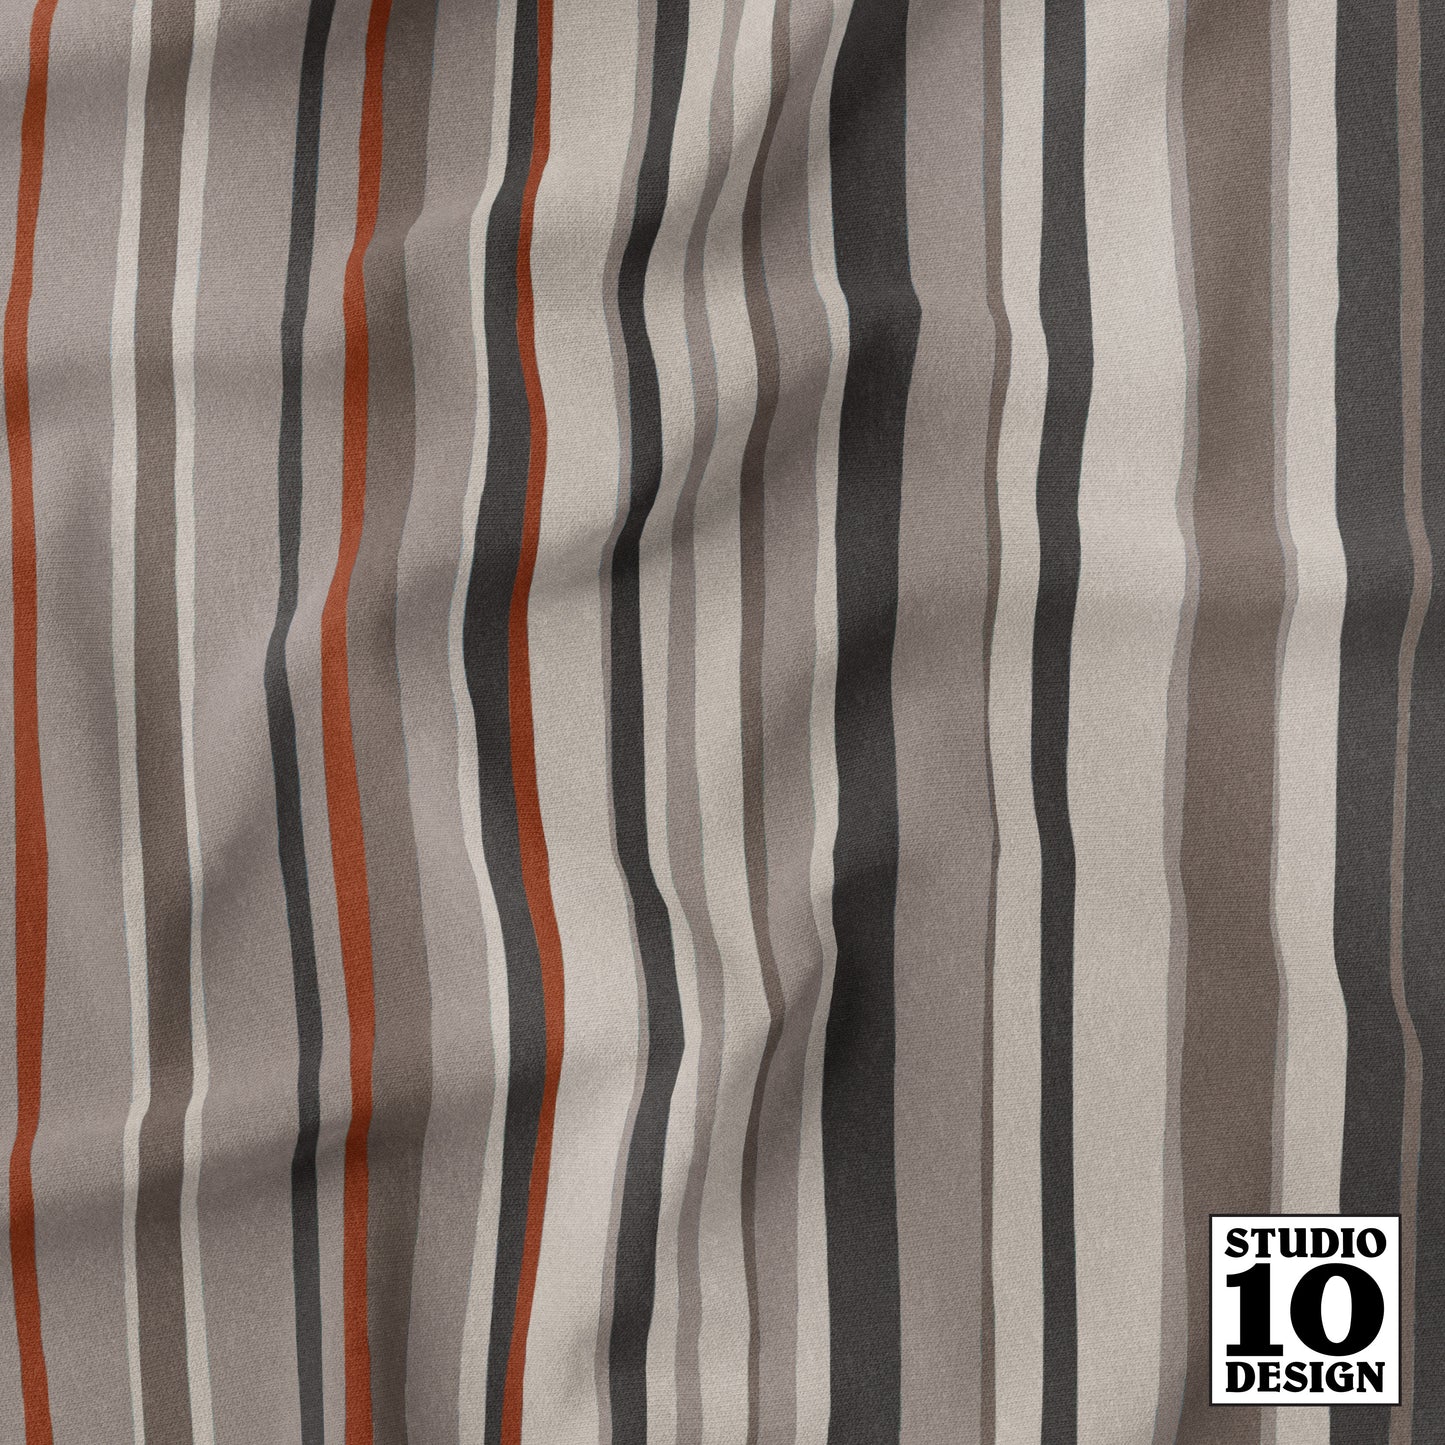 Striped Sophisticate Griffith Printed Fabric by Studio Ten Design